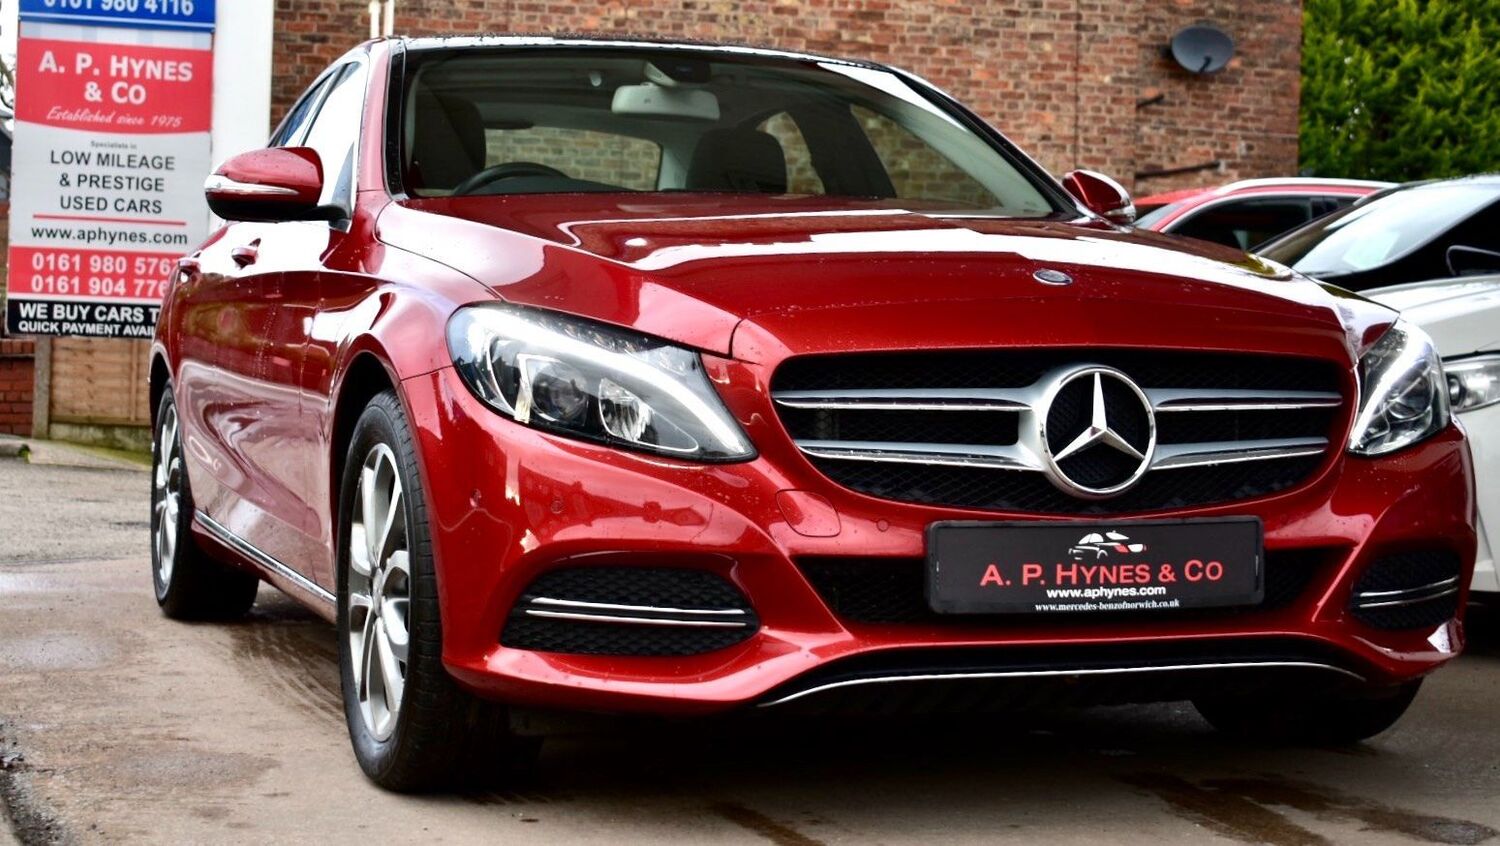 Used MERCEDES-BENZ C CLASS in Altrincham, Cheshire